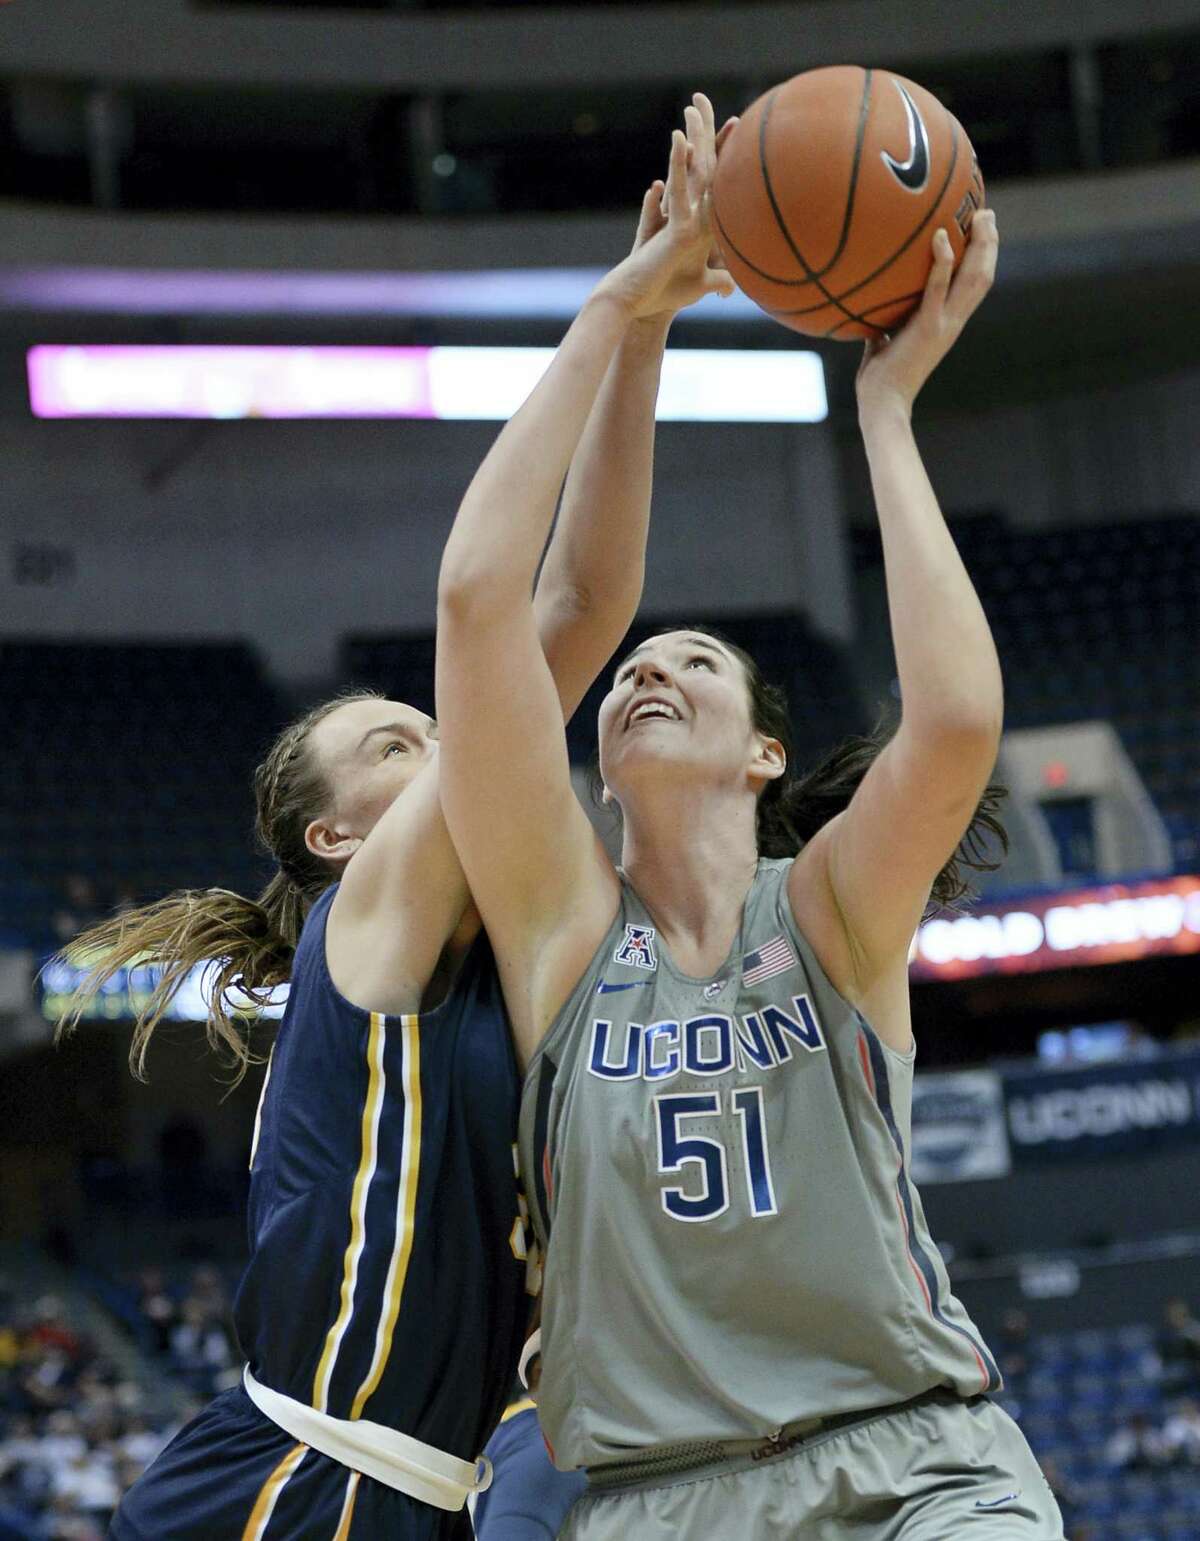 UConn’s Natalie Butler shoots as Pace’s Kirsten Dodge, left, defends in the second half on Sunday.